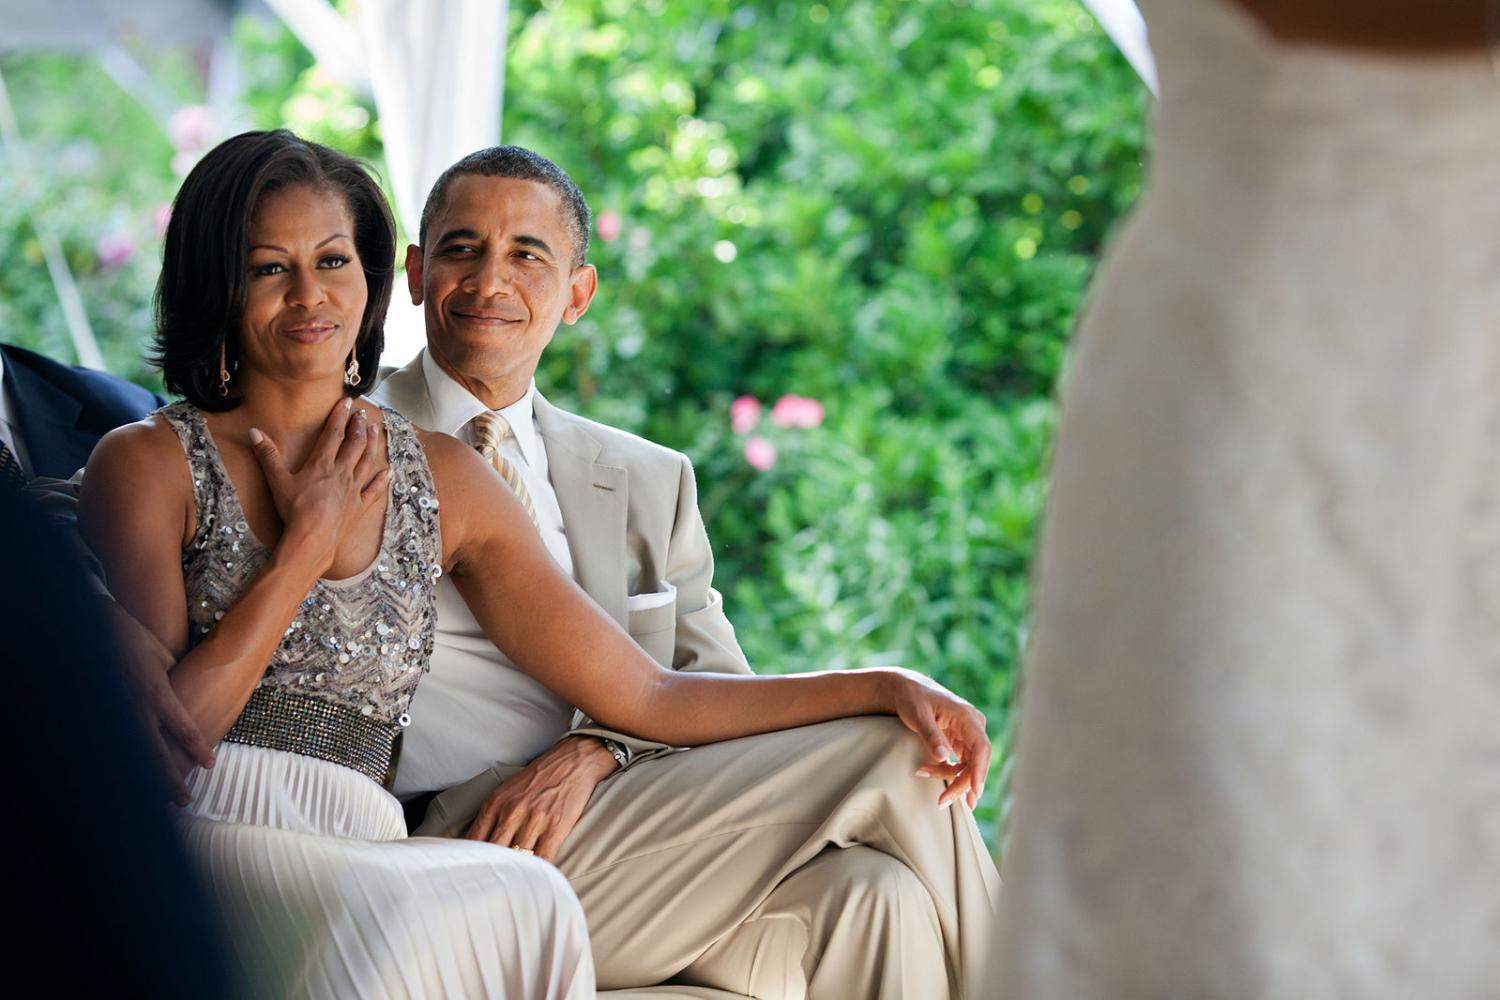 Barack+and+Michelle+Obama+were+among+those+recognized+by+Vanity+Fair+for+their+exemplary+fashion+choices.